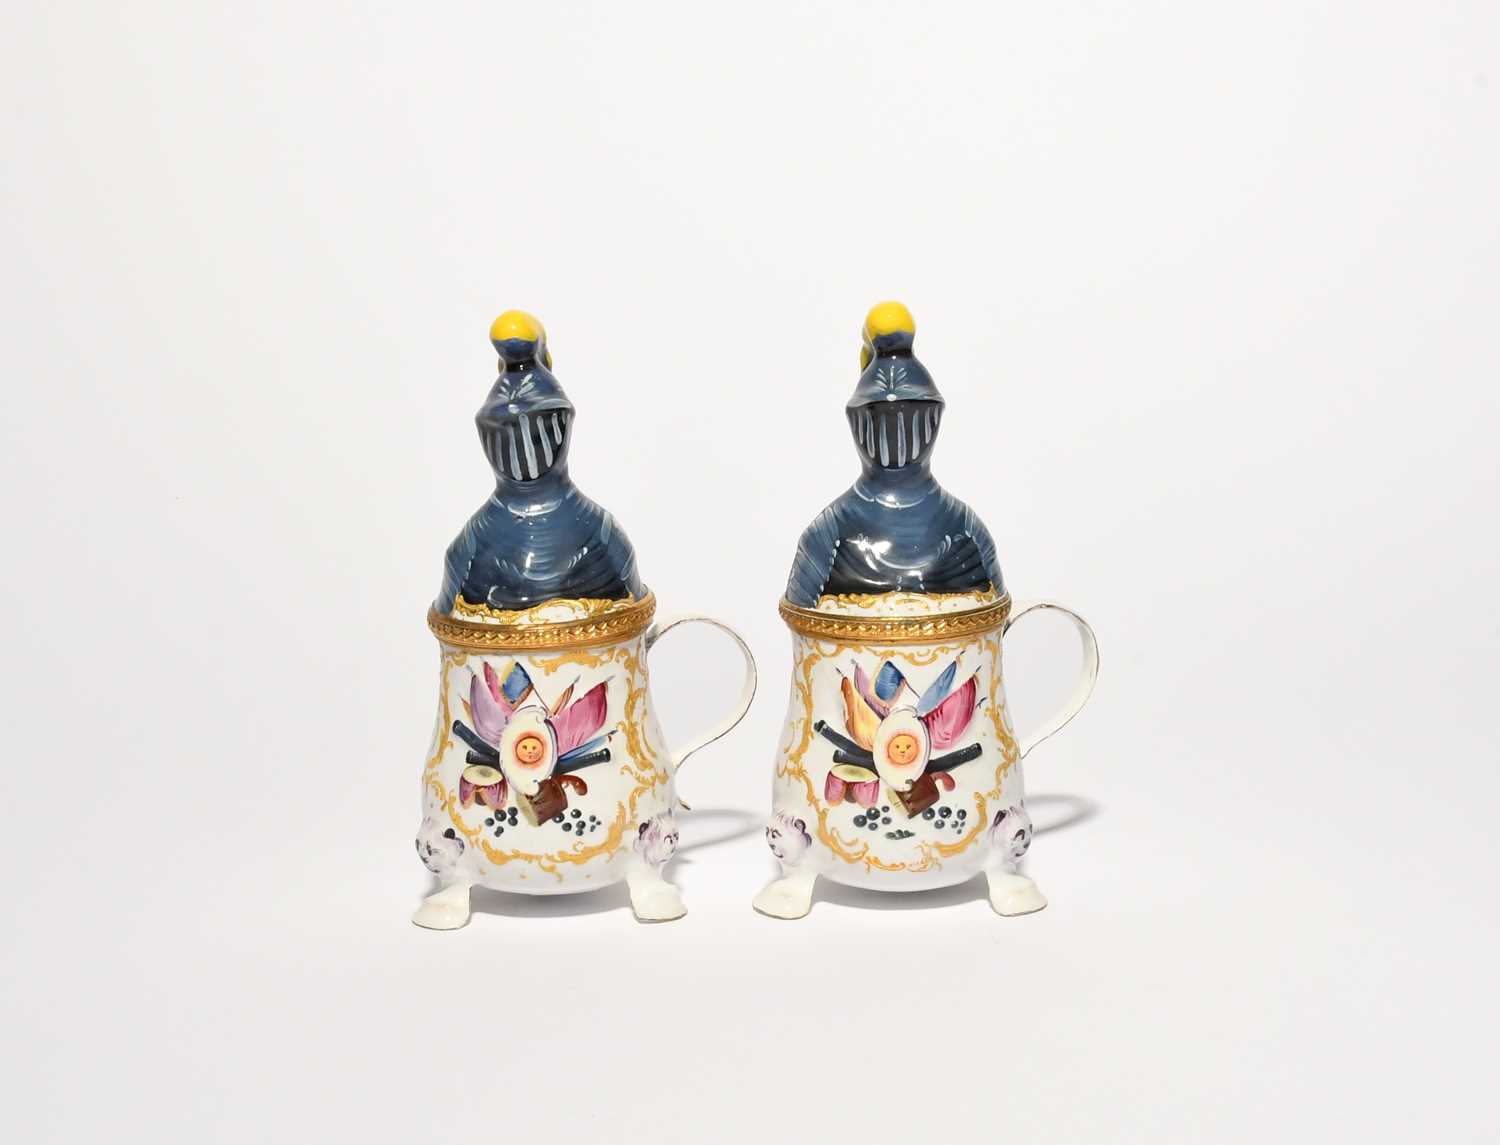 A pair of Bilston enamel mustard pots and covers, c.1780, each modelled as a knight in armour with a